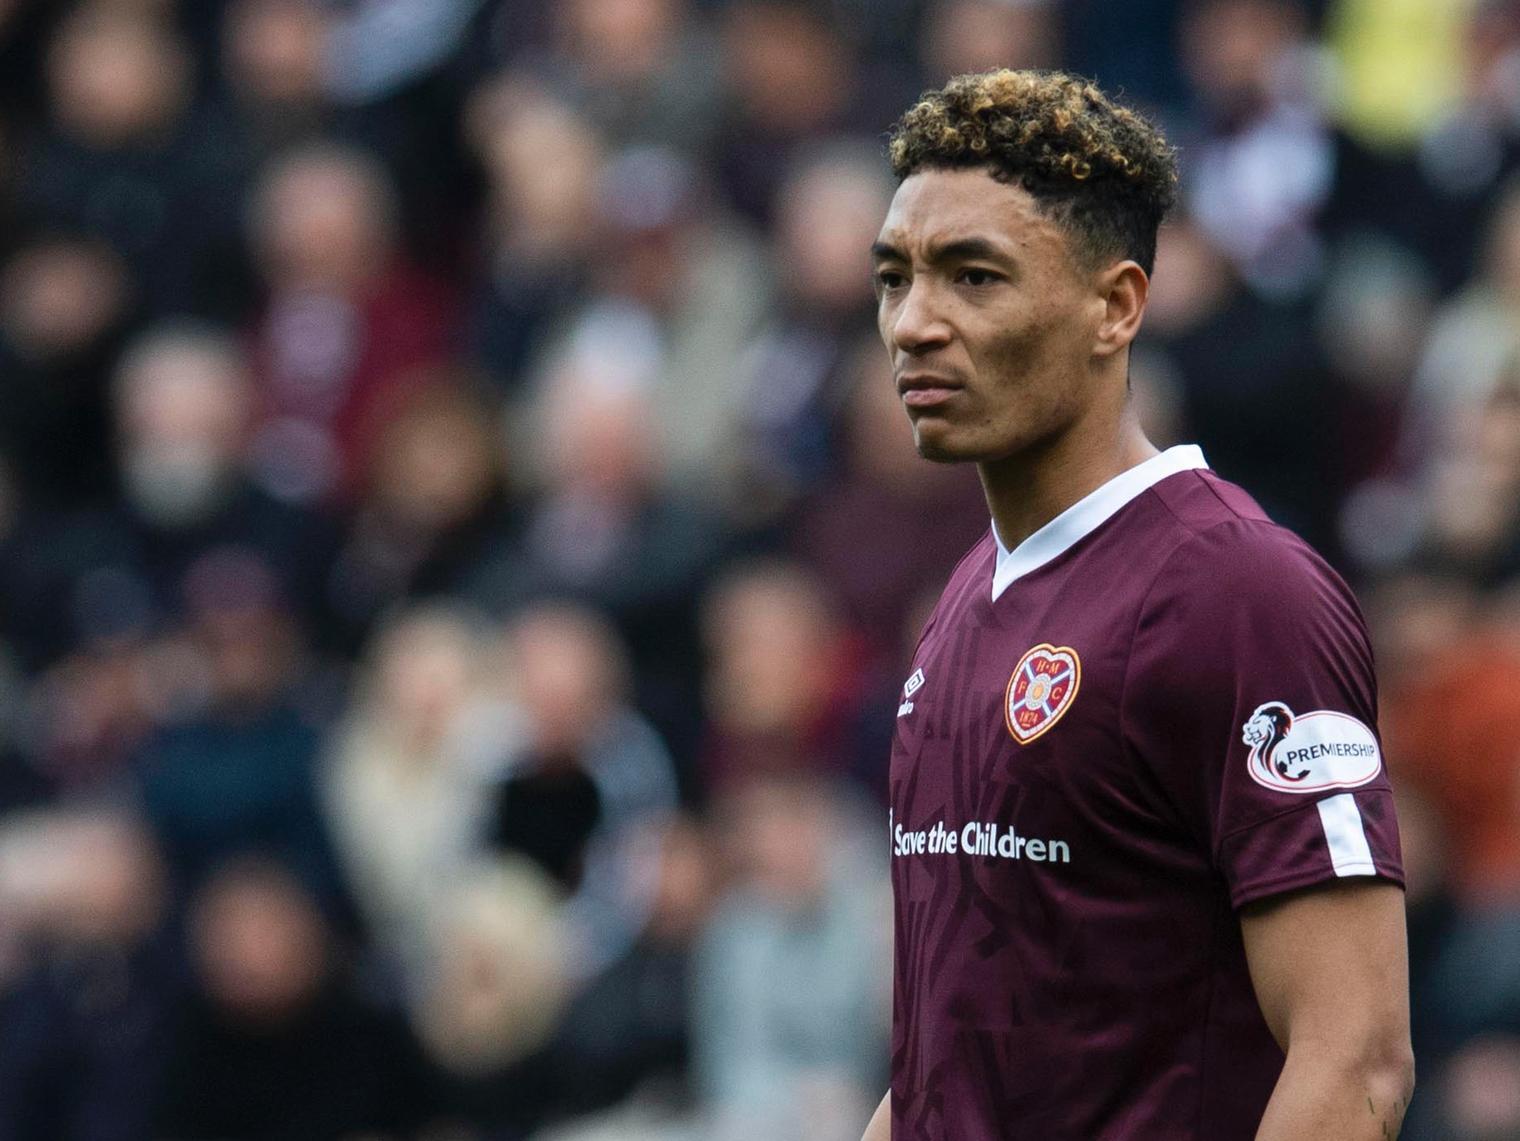 Is right-back his position? Gave Hearts a good attacking option down the right. Nearly scored after mazy run, put in some good deliveries and didnt shirk defensive responsibilities.